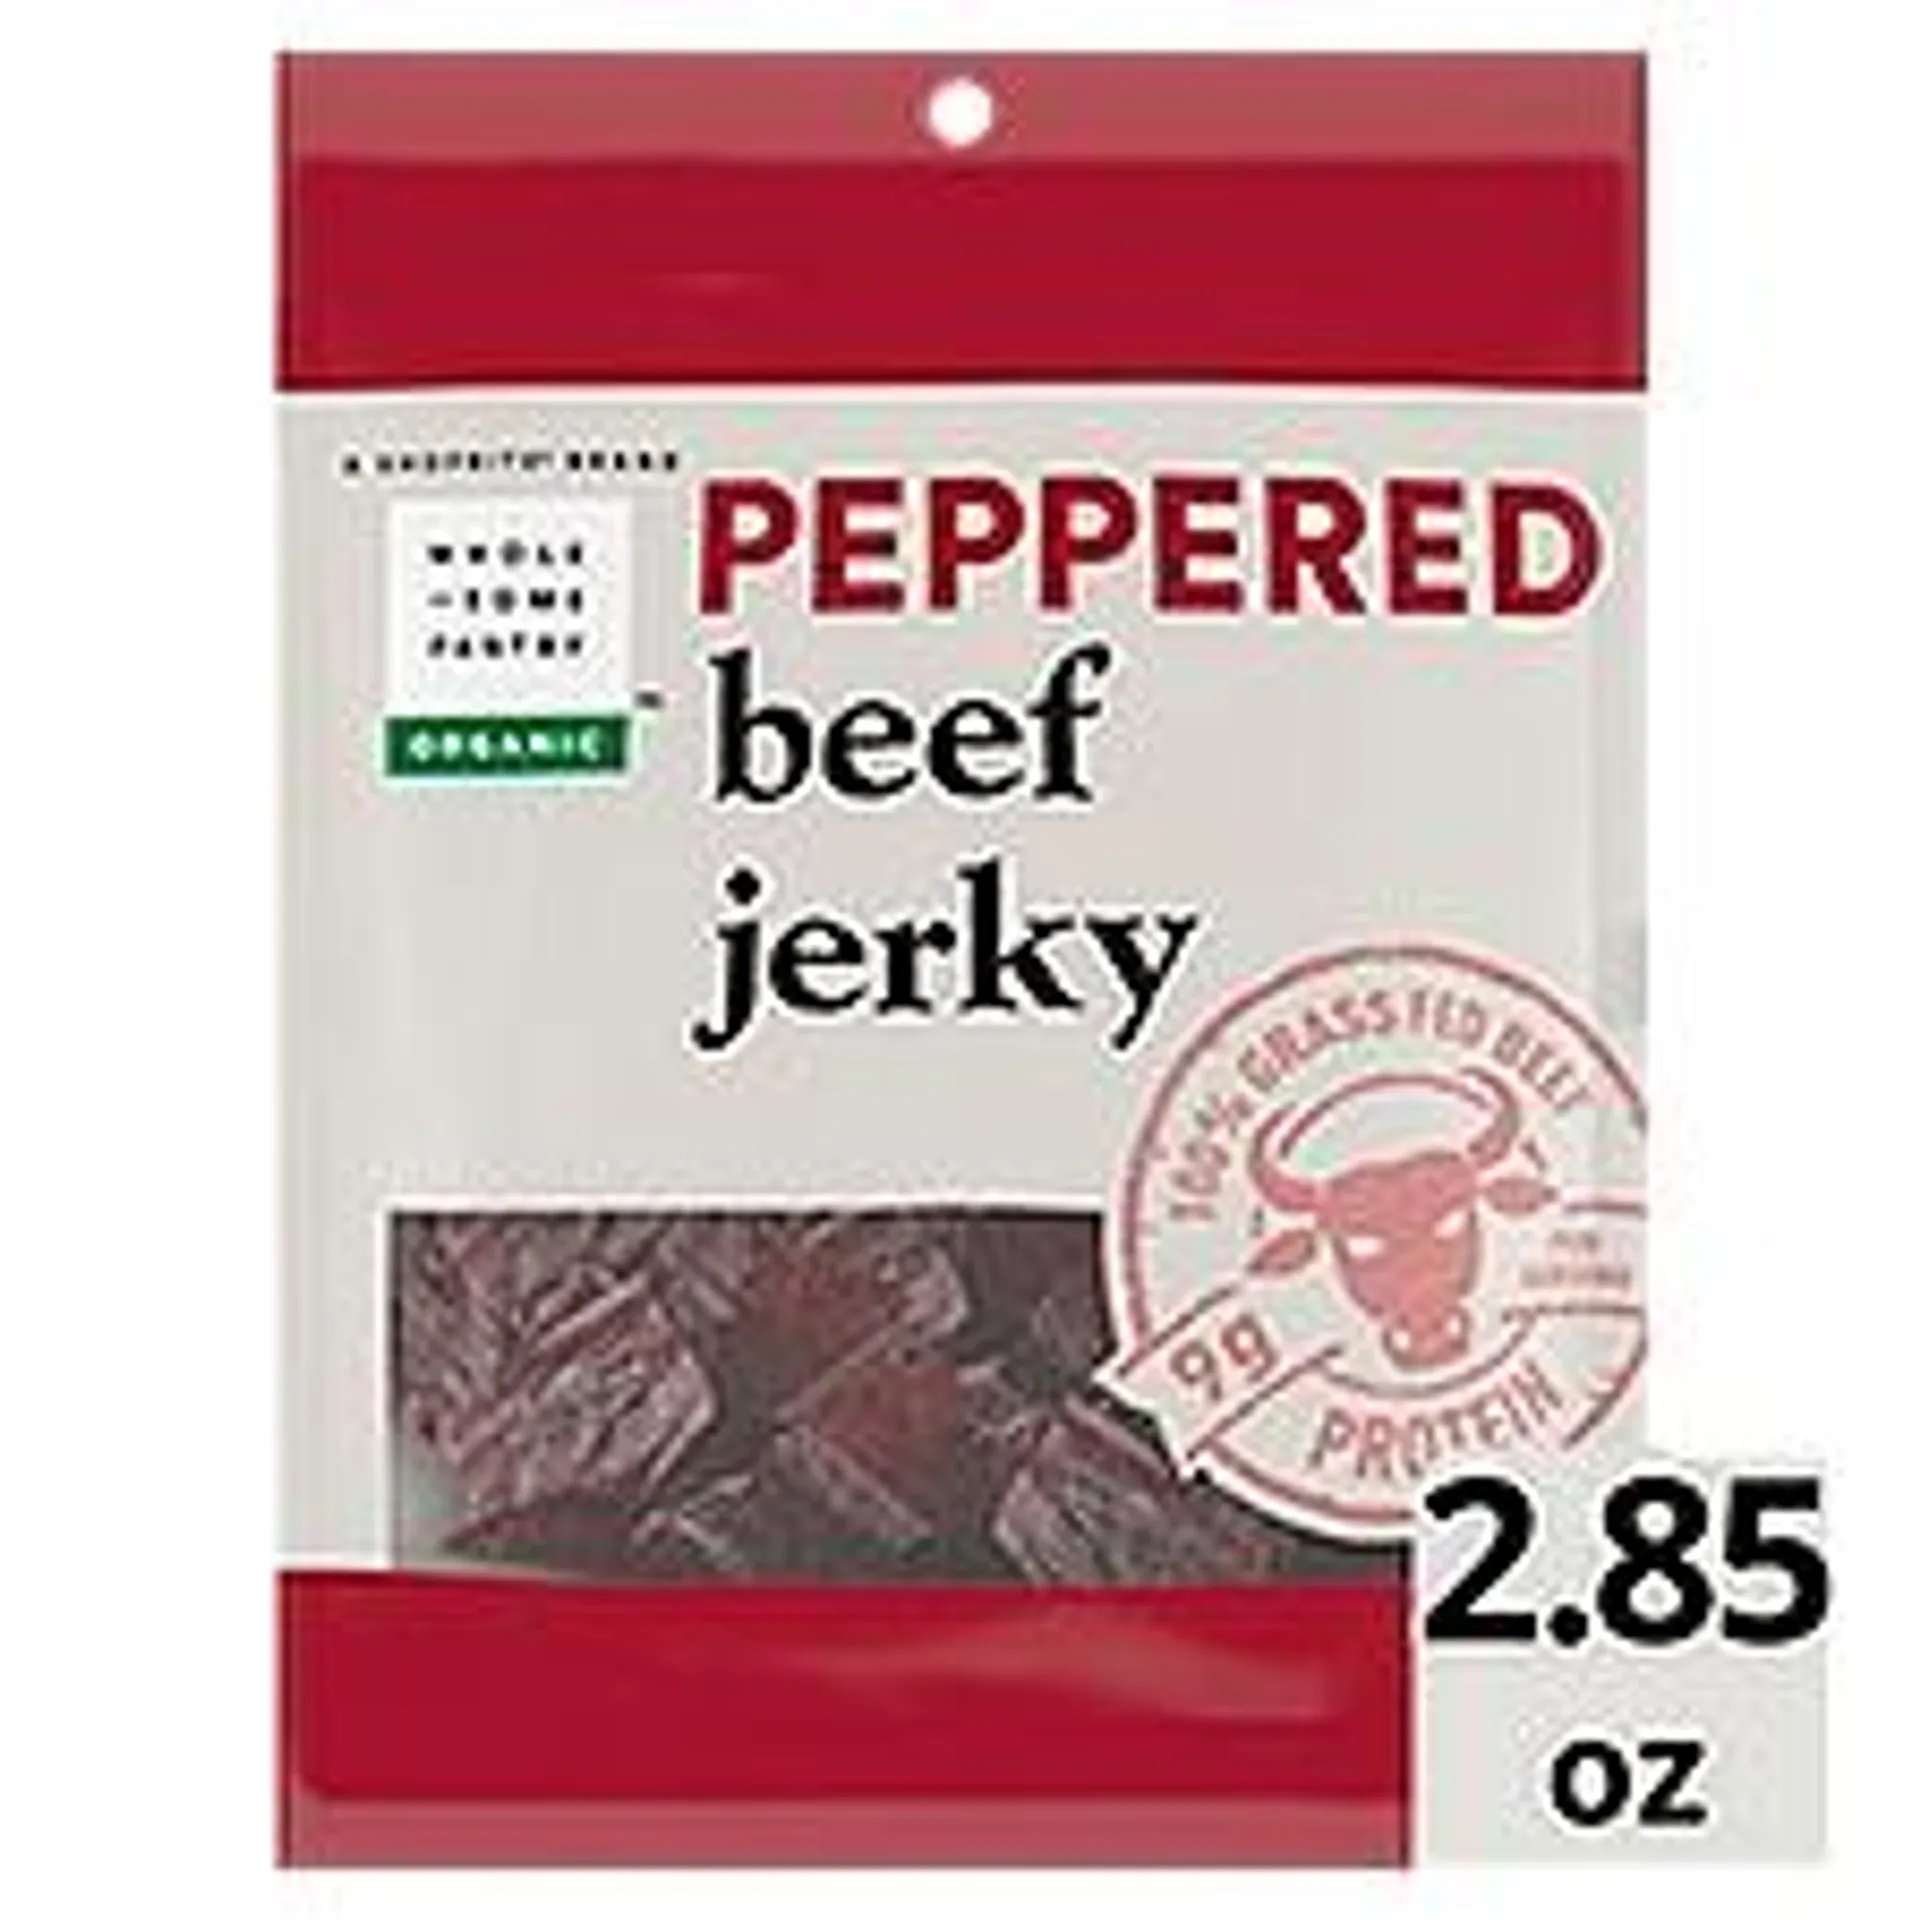 Wholesome Pantry Organic Peppered Beef Jerky, 2.85 oz, $5.49